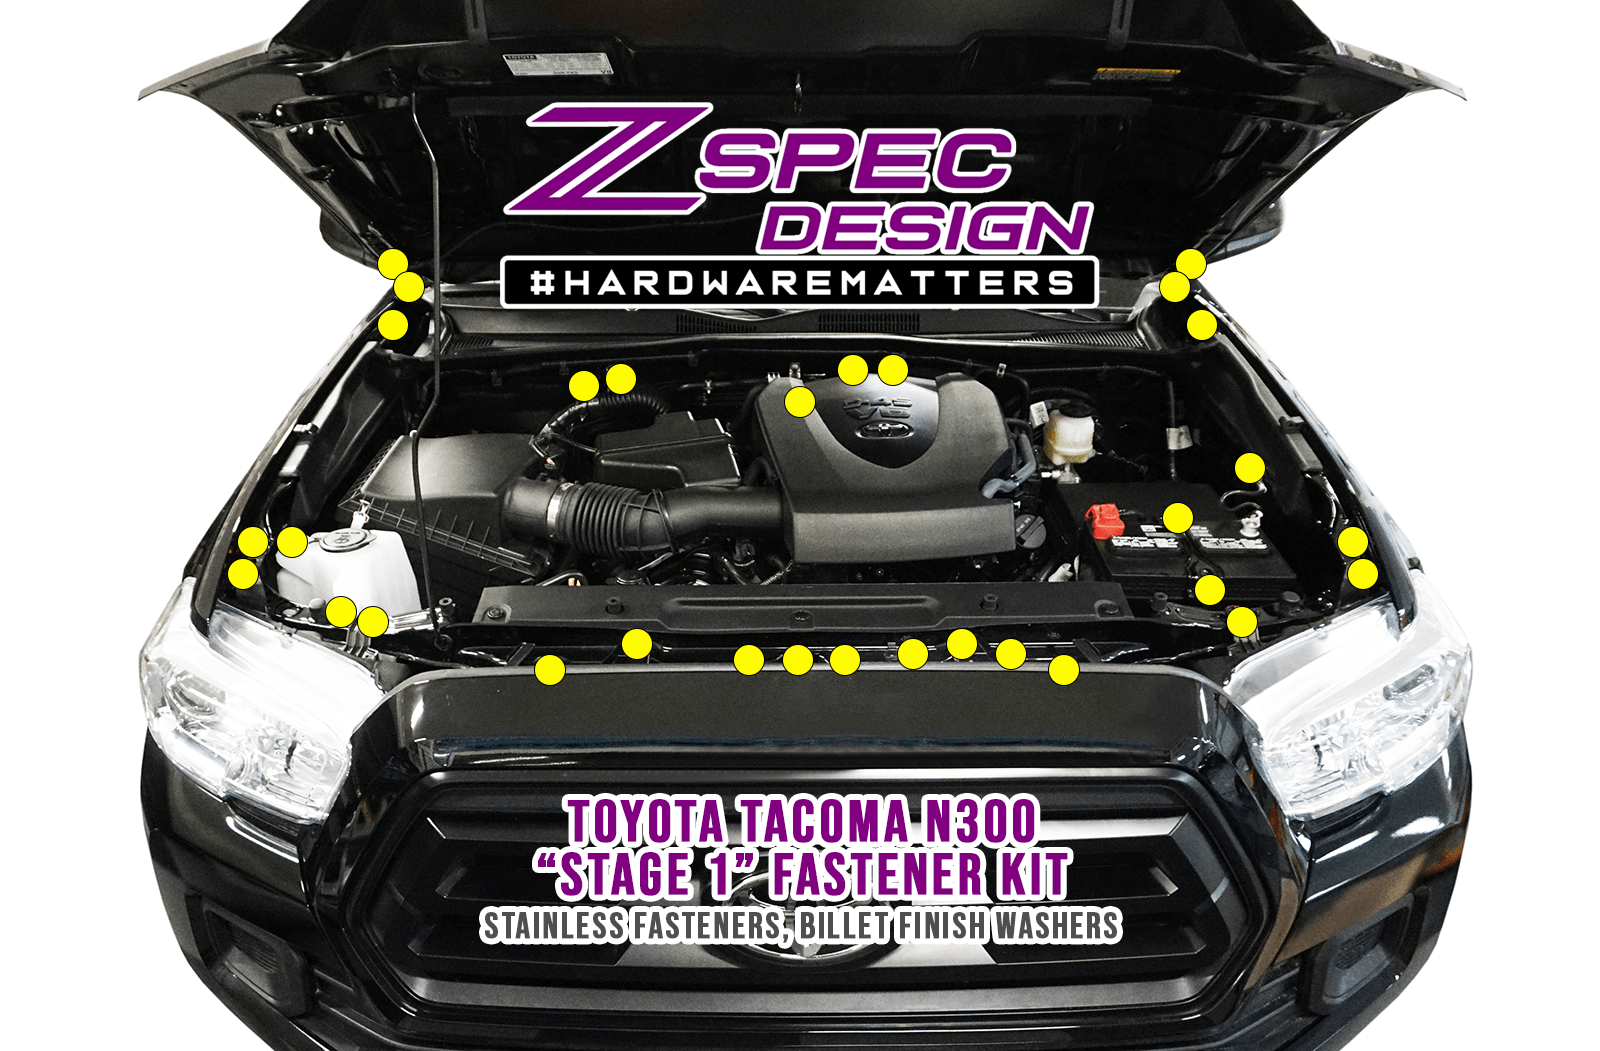 ZSPEC "Stage 1" Dress Up Bolts® Fastener Kit for '16-23 Toyota Tacoma N300, Stainless & Billet  SUS304 6061 Billet Hardware Engine Bay Performance Upgrade Modification Car Auto Vehicle Drift rwd usdm